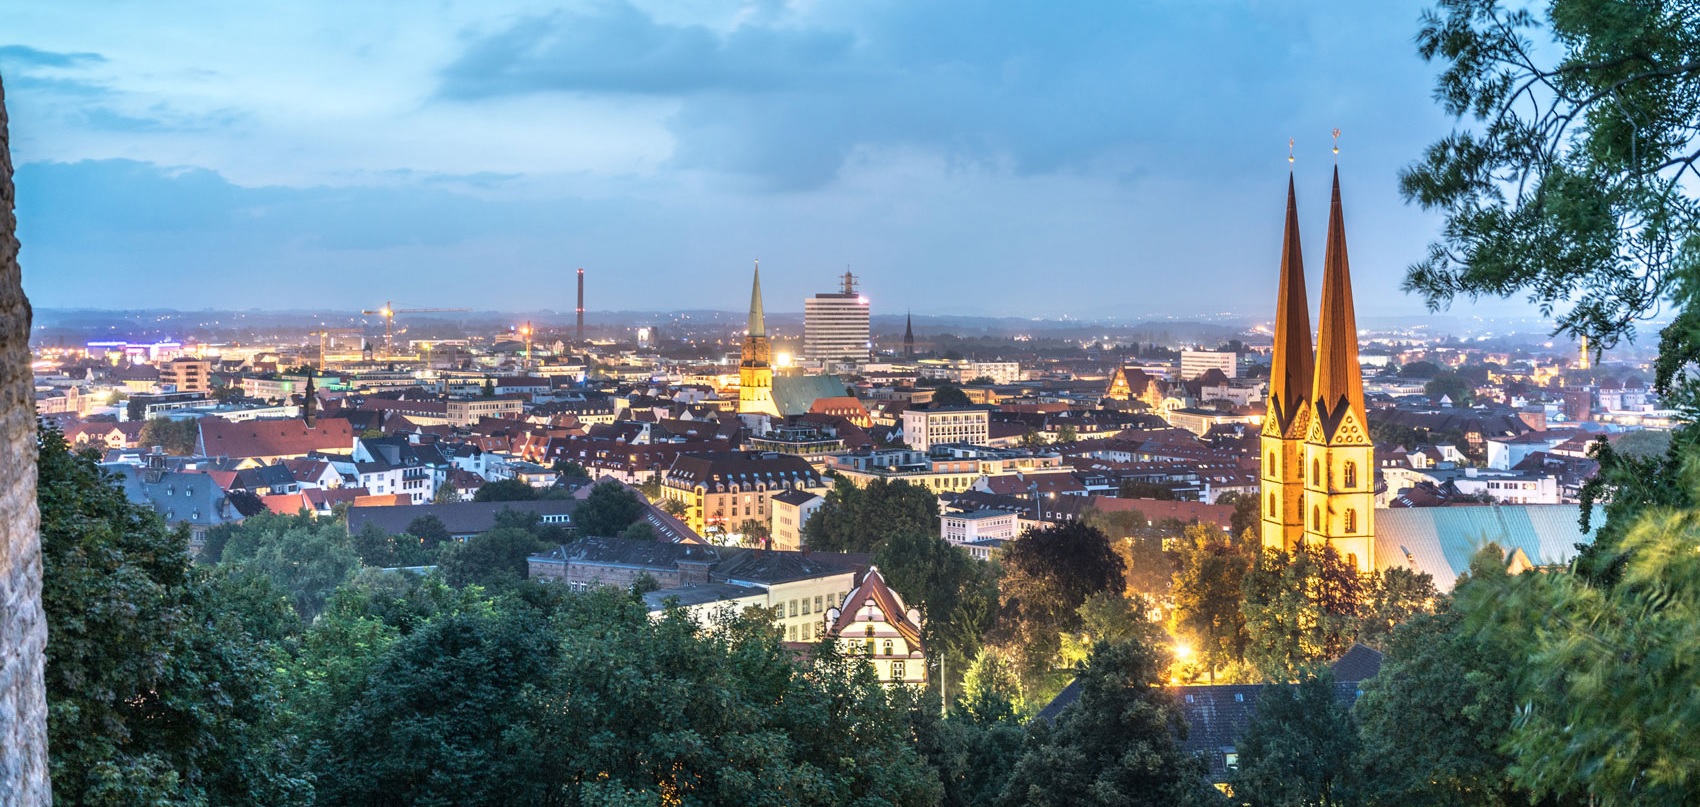 View on Bielefeld at dusk